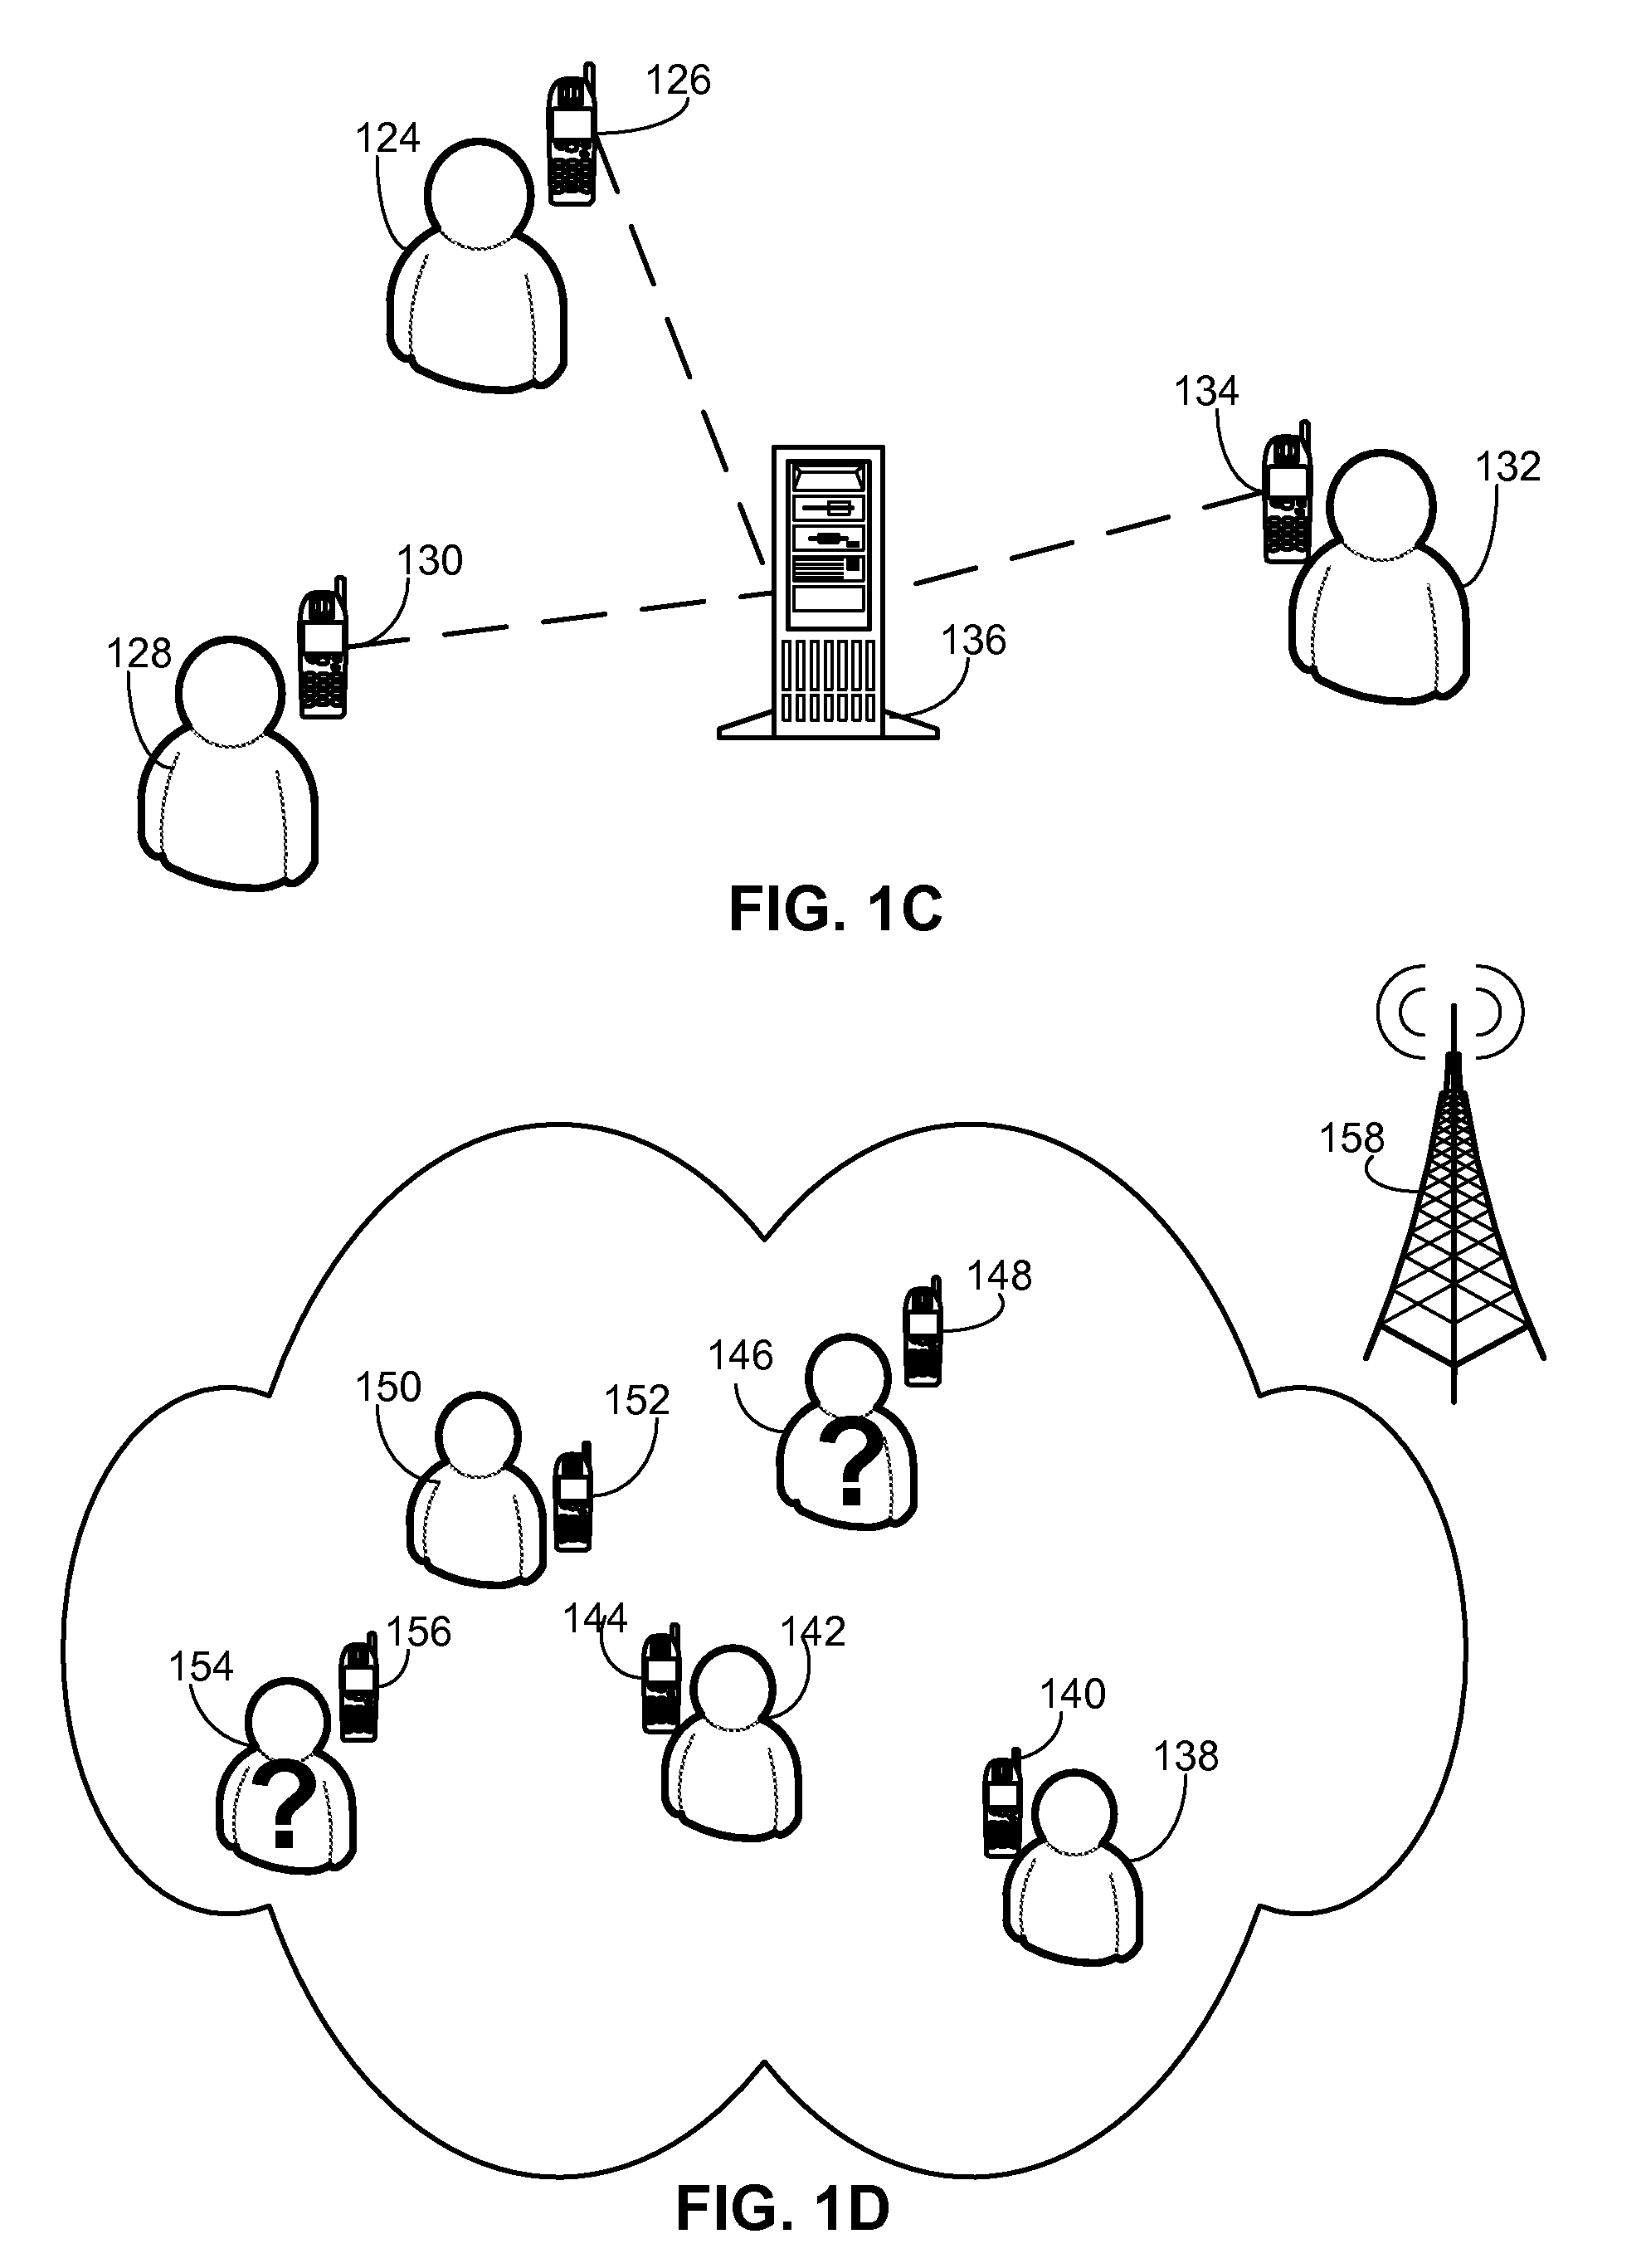 Adjusting security level of mobile device based on presence or absence of other mobile devices nearby